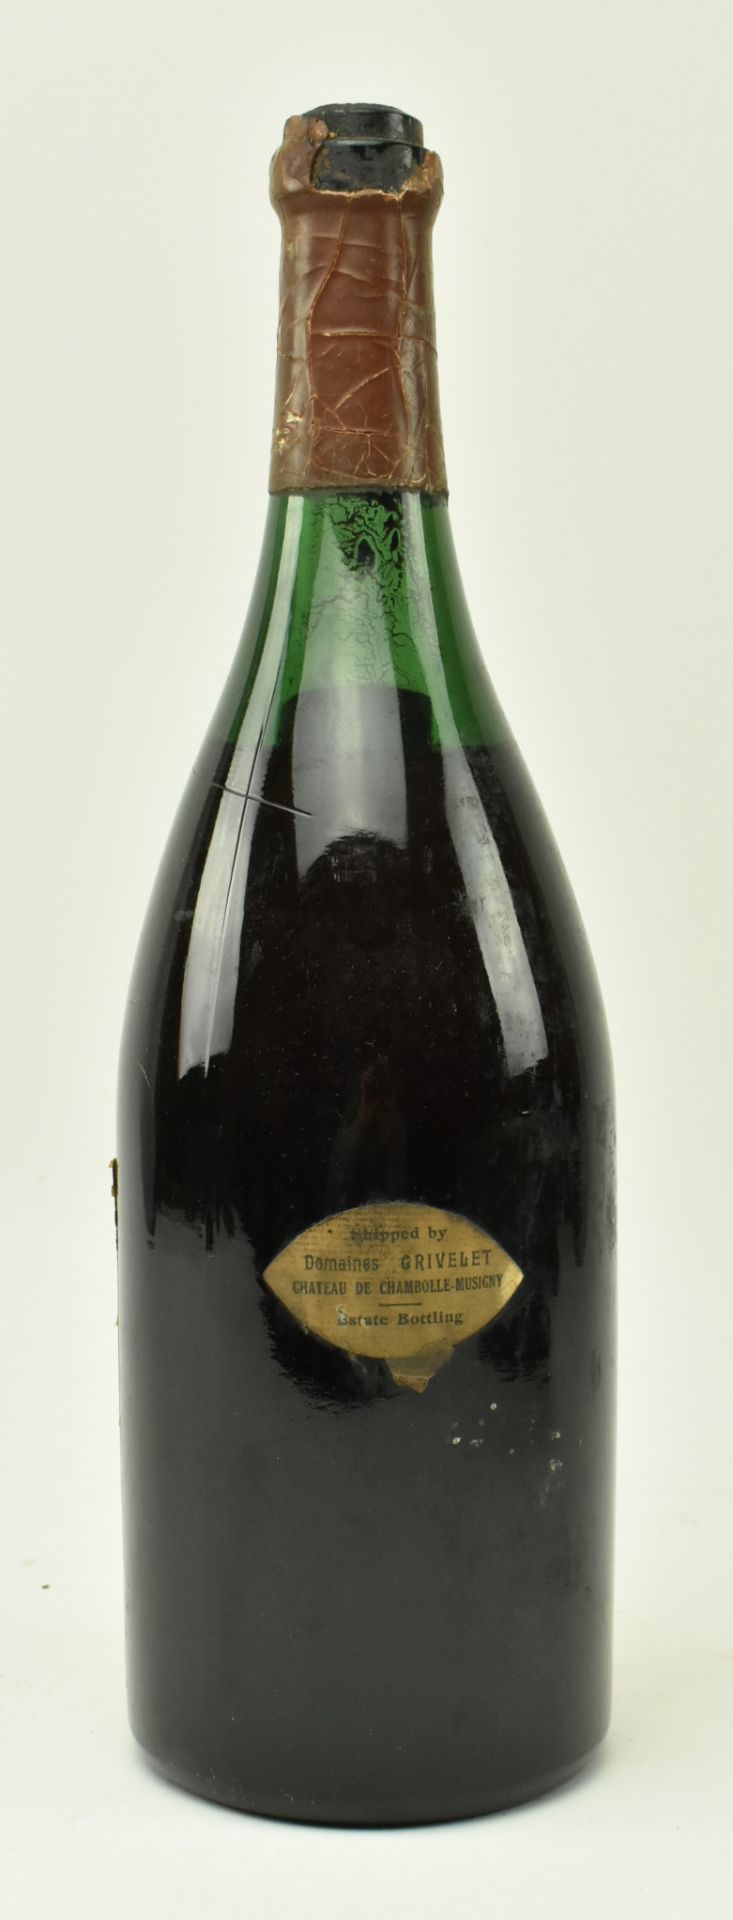 1940 CHAMBOLLE-MUSIGNY GRIVELET DOMAIN MAG WINE BOTTLE - Image 5 of 6